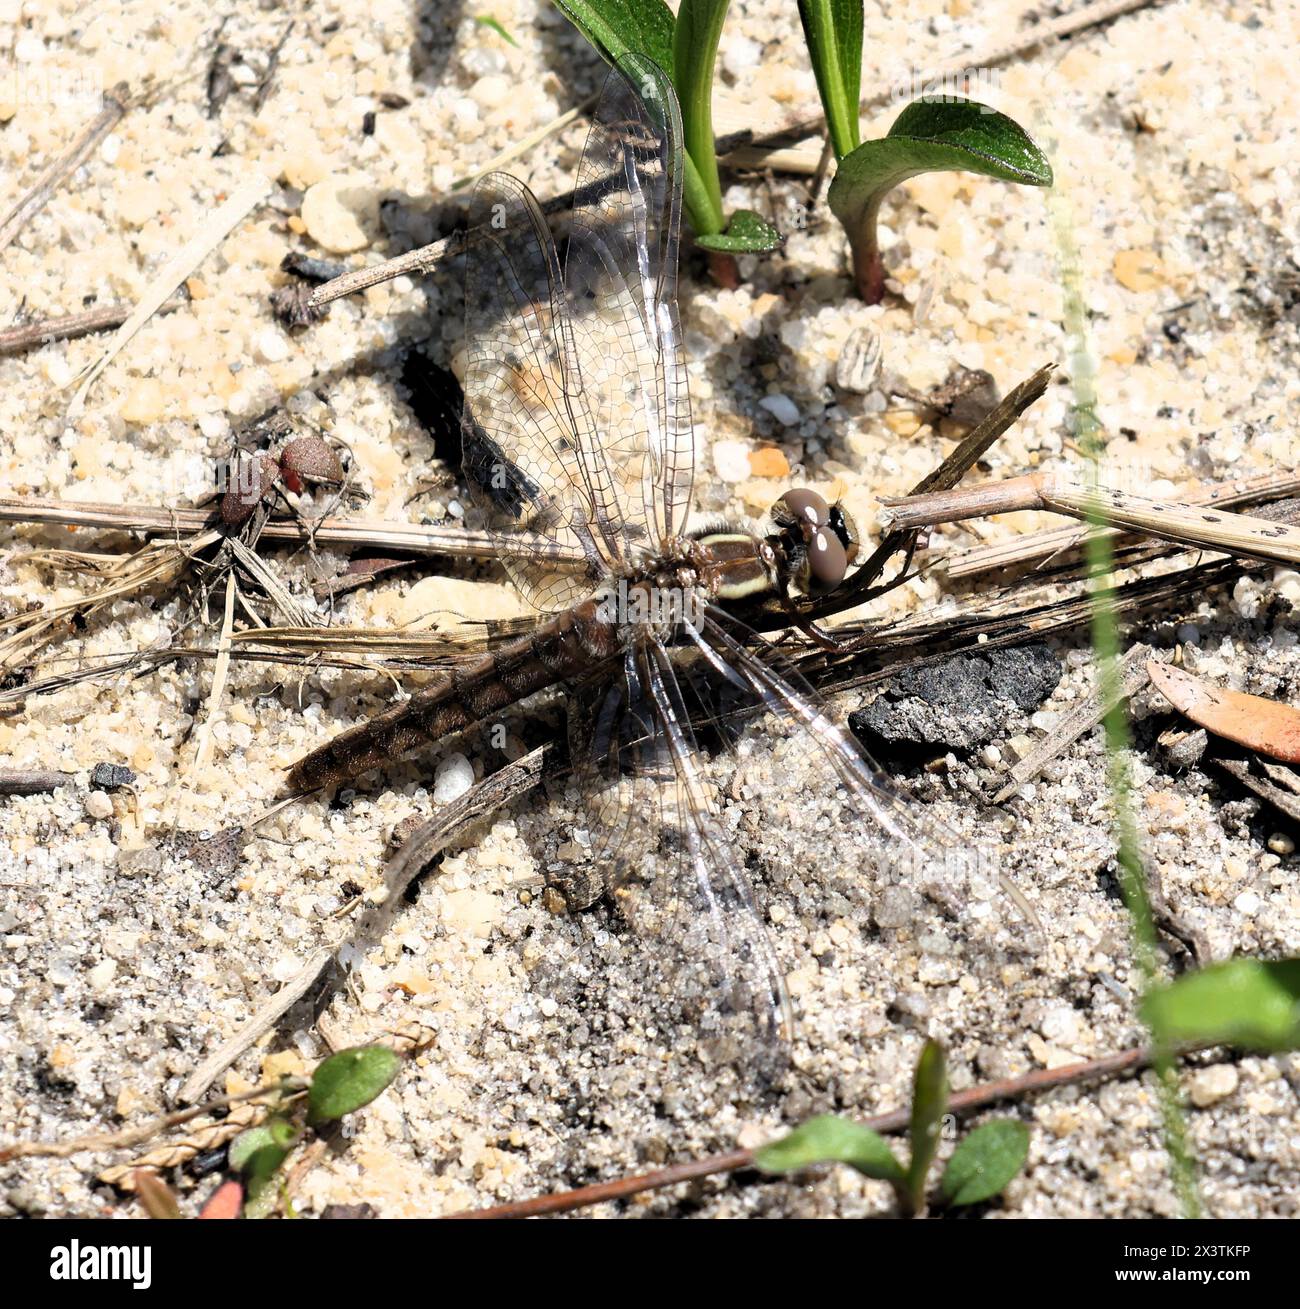 Dragonfly perched on the ground at Whitesbog in the sandy New Jersey Pine Barrens Stock Photo